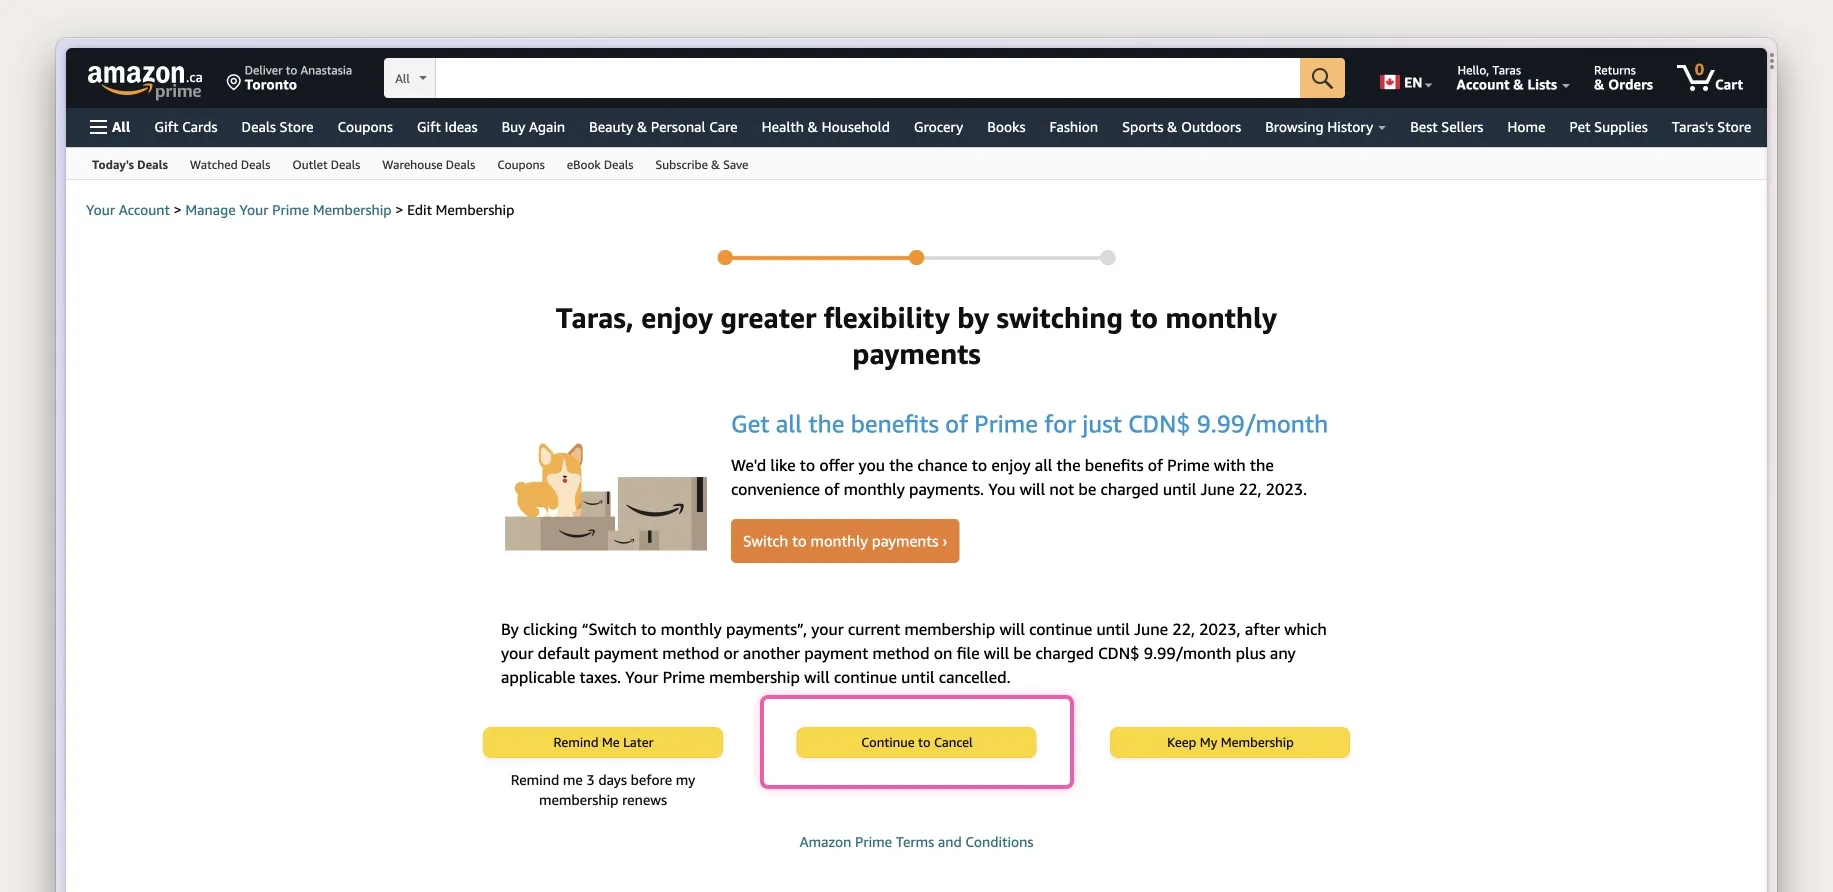 Another Amazon benefits page